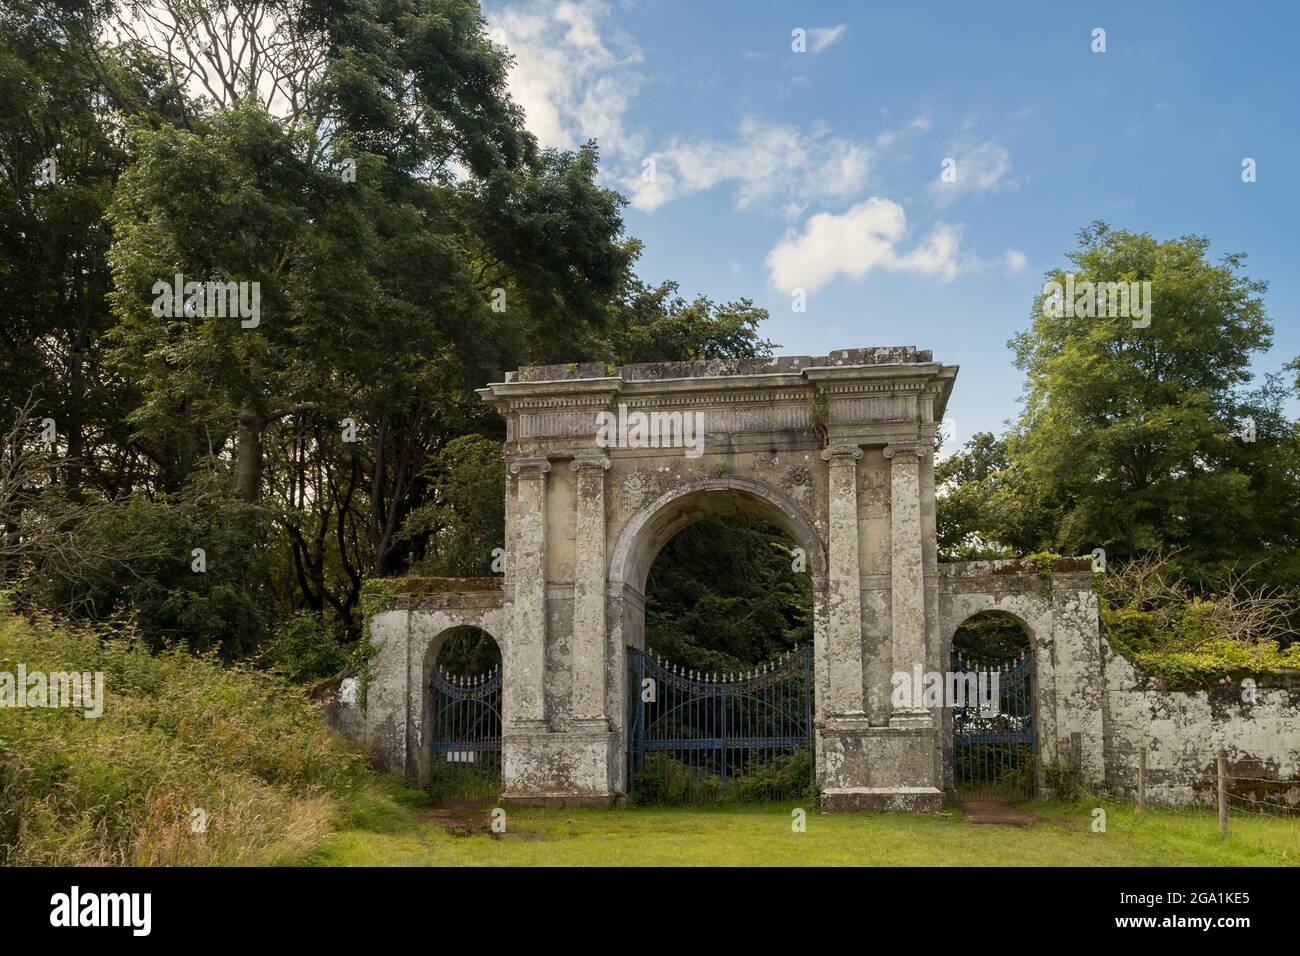 The Freemantle Gate entrance to the ruins of Appuldurcombe House an 18th century Baroque style mansion owned by Sir Richard Worsley Isle of Wight Stock Photo